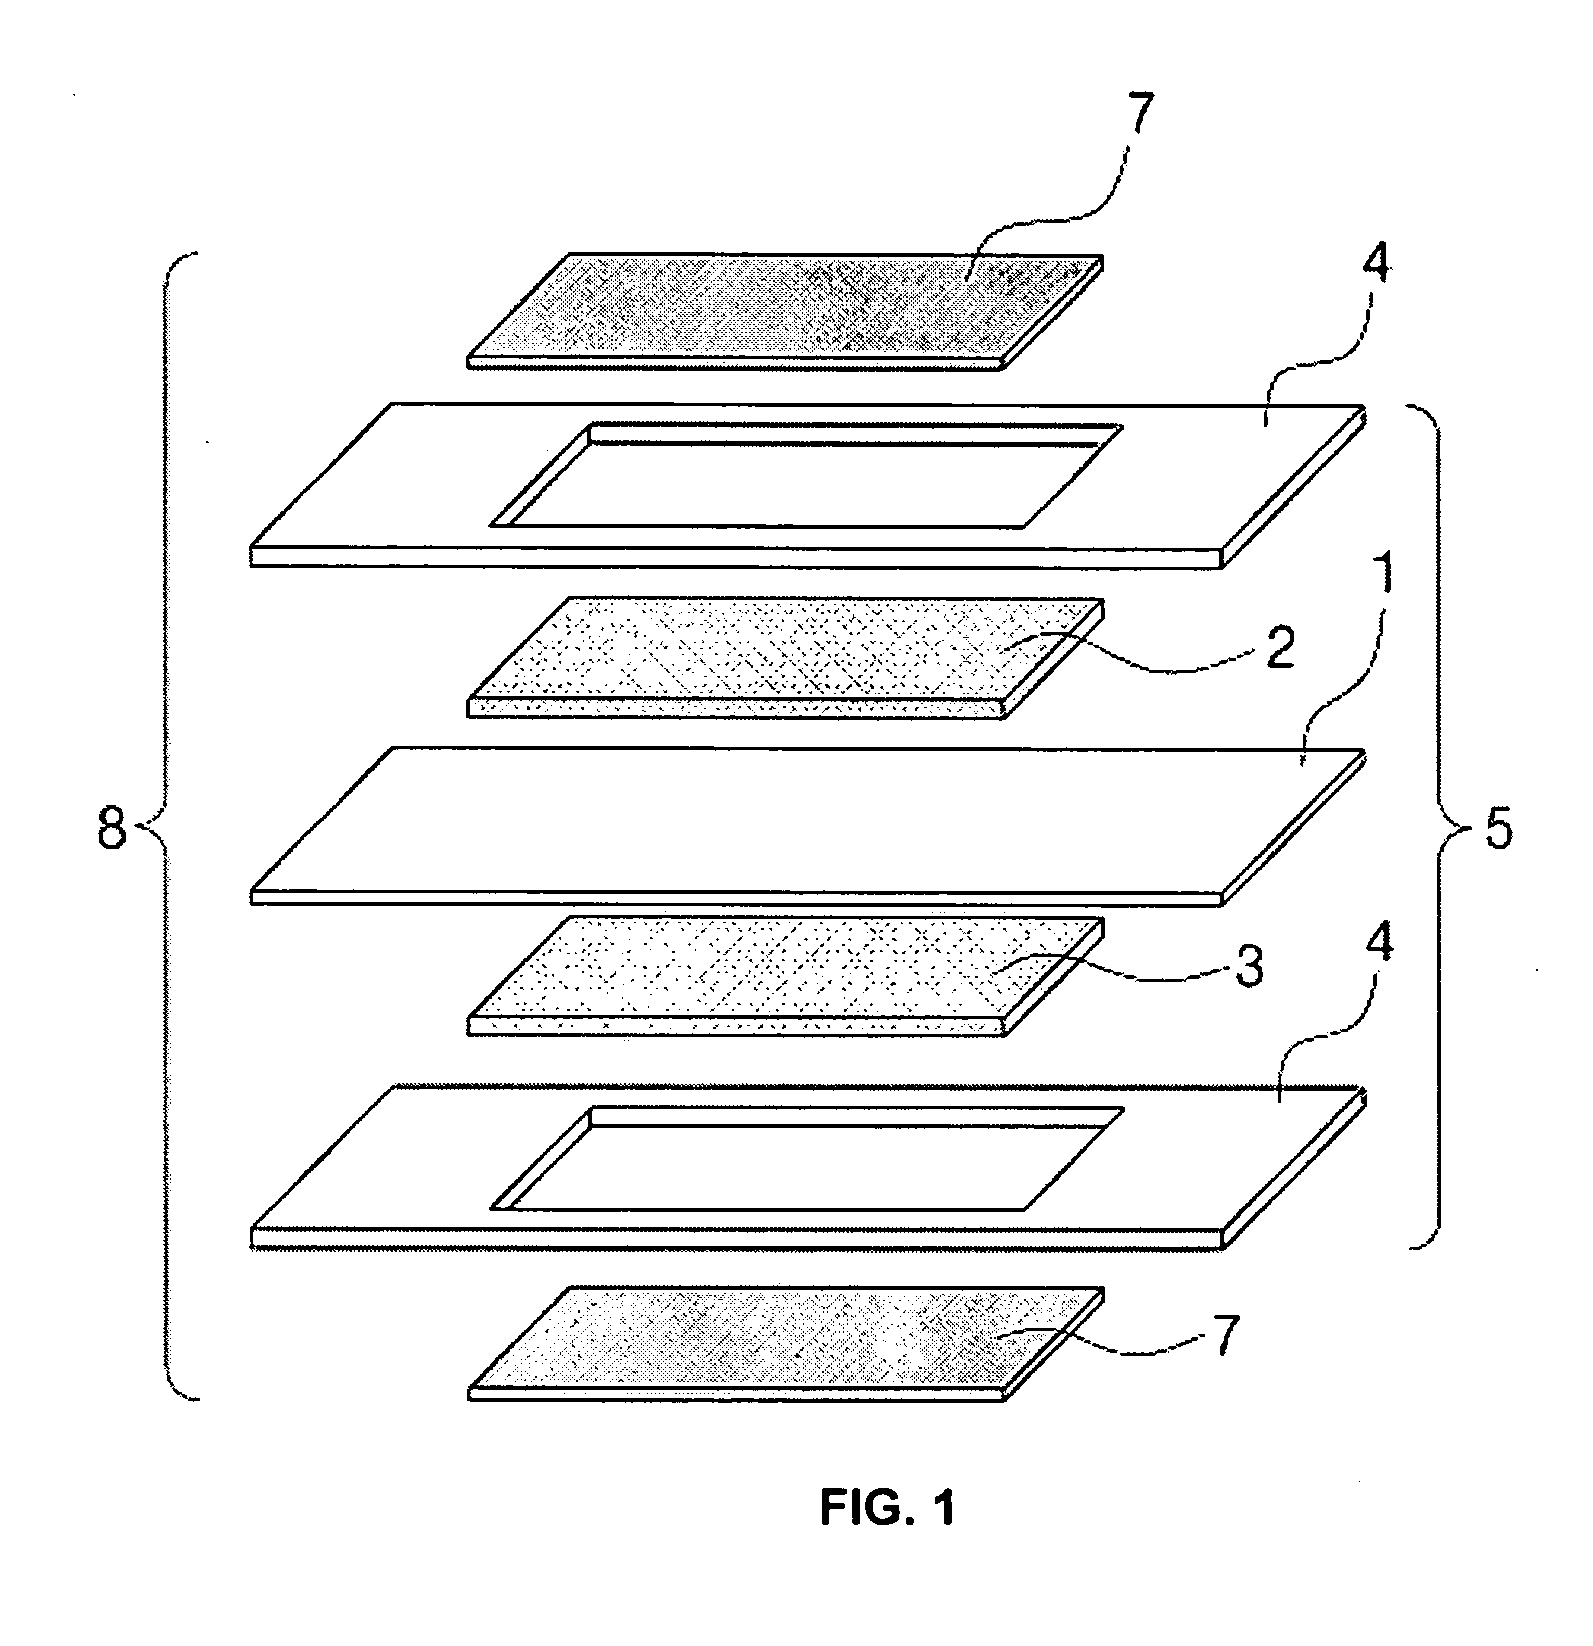 Apparatus for automatically punching and bonding MEA materials for fuel cell